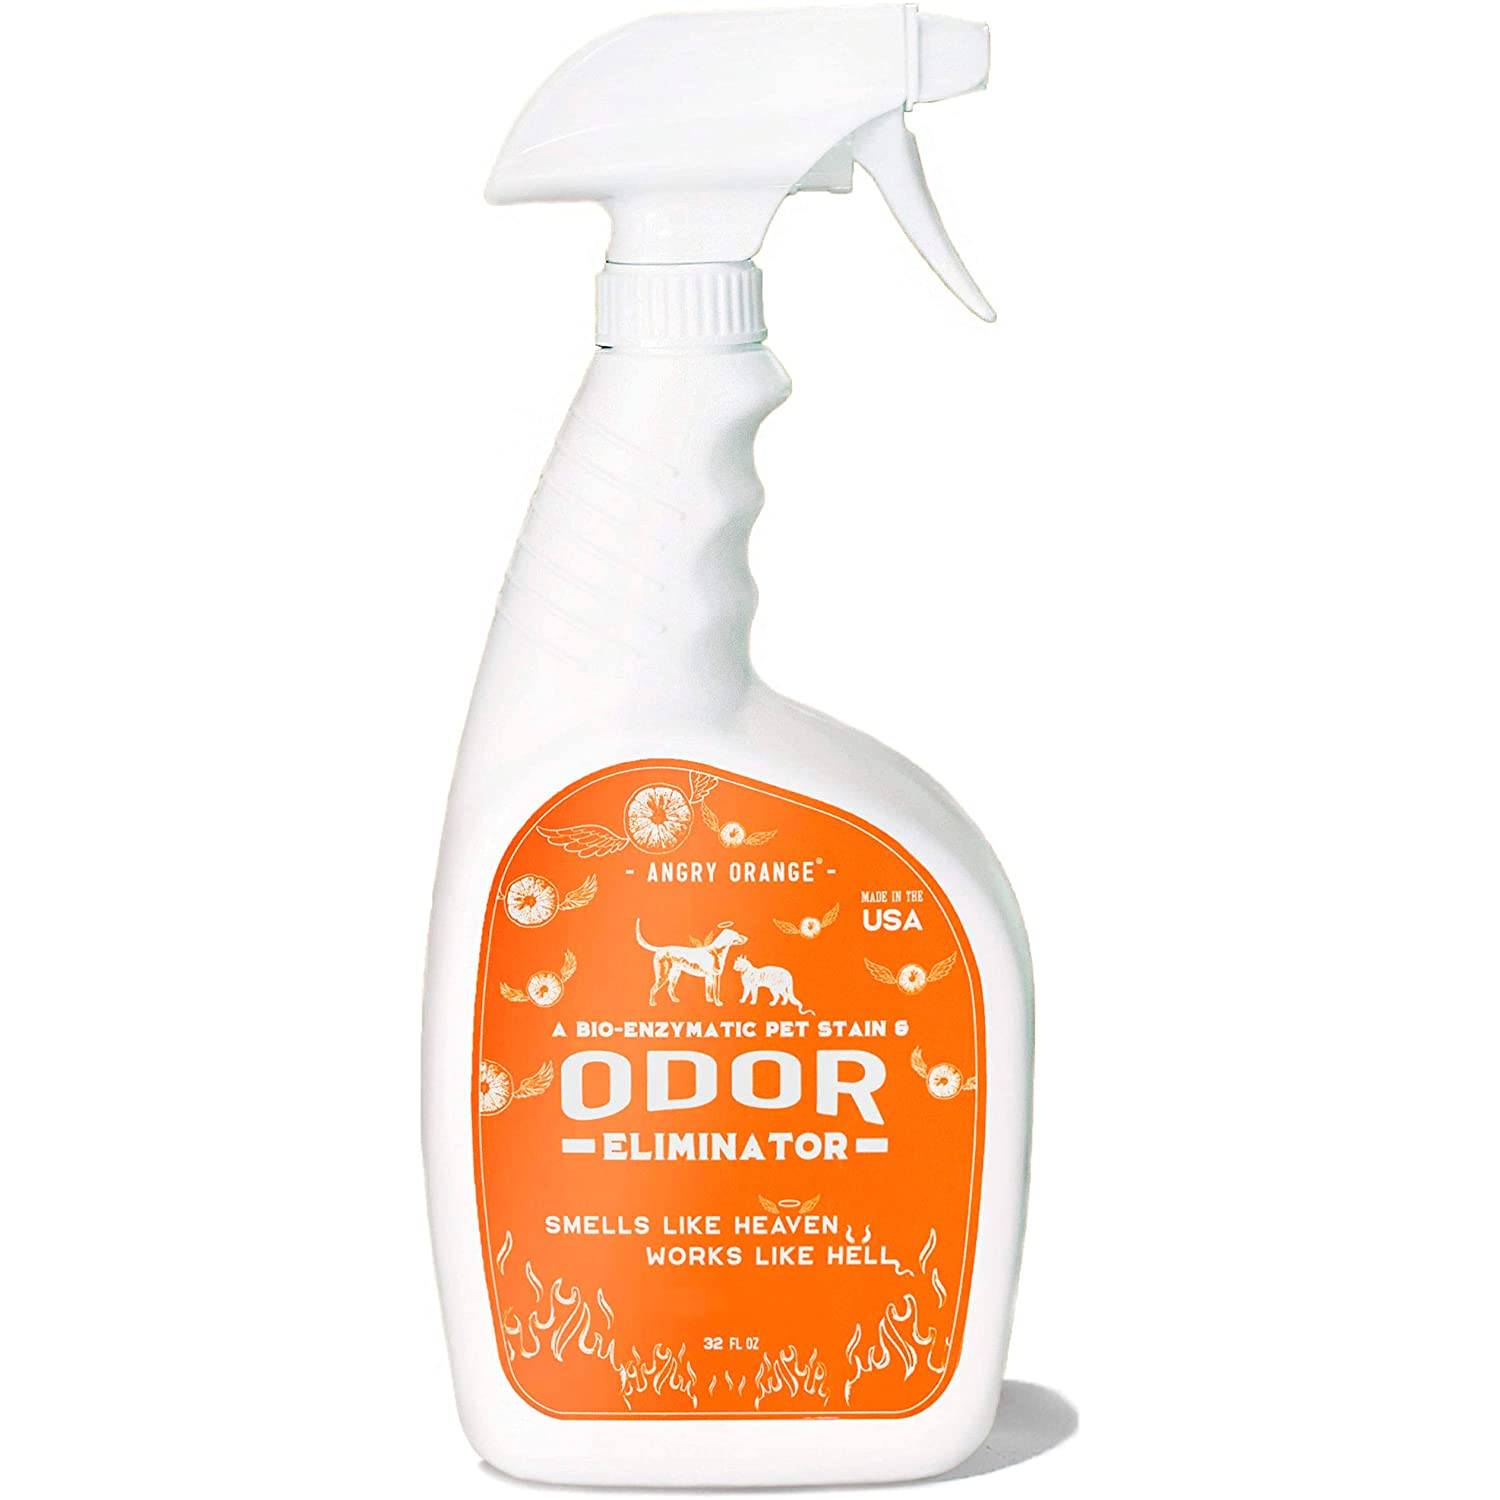 Pet Stain Odor. Odor Eliminator нейтрализатор запахов Angry Orange. Odor Neutralizers. Pets Cleaners.